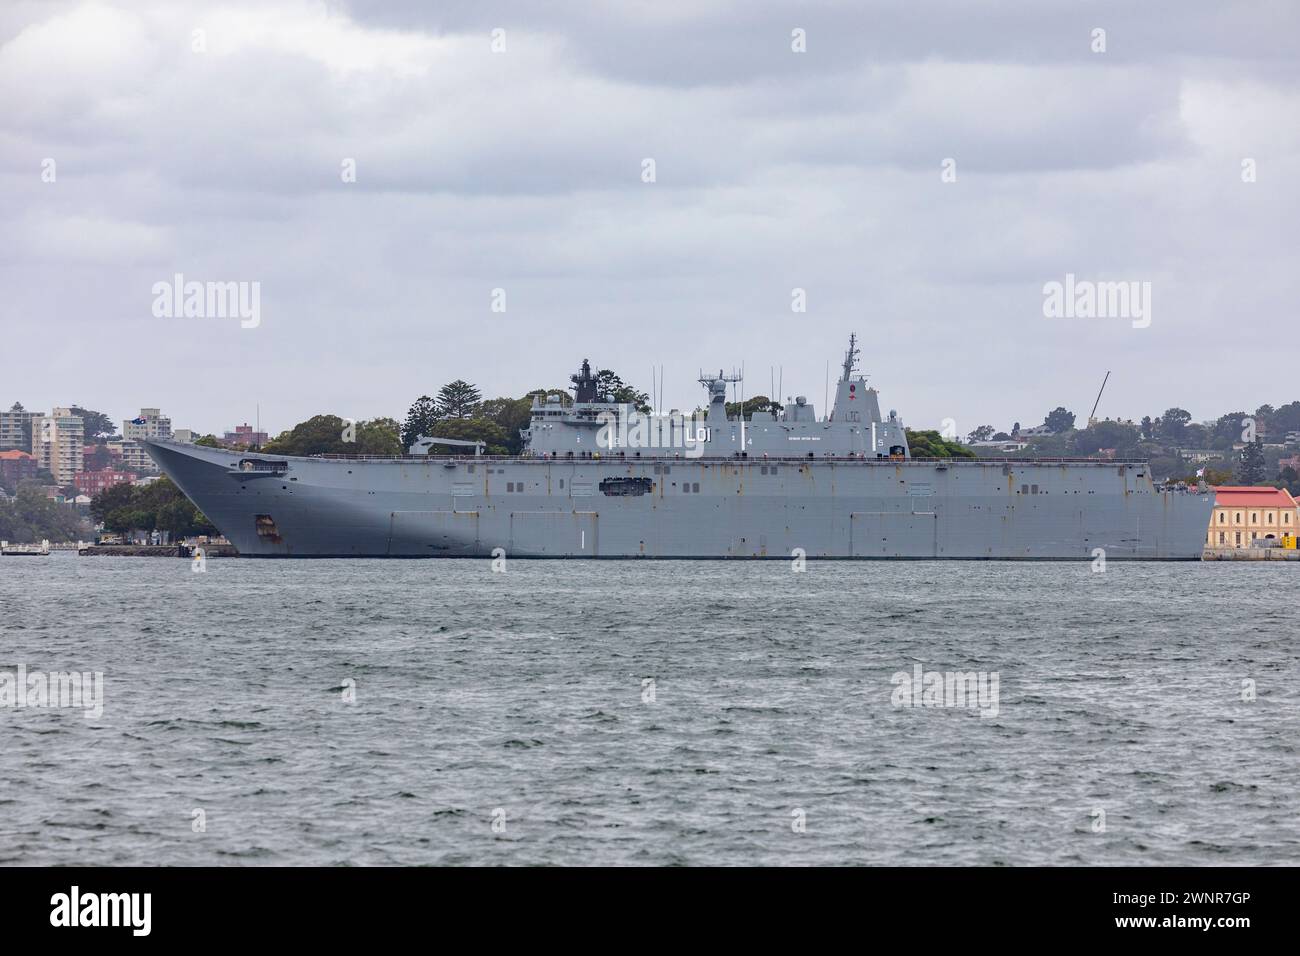 HMAS Adelaide (L01) is the second of two Canberra-class landing helicopter dock ships of the Royal Australian Navy, Garden Island,Sydney,Australia Stock Photo